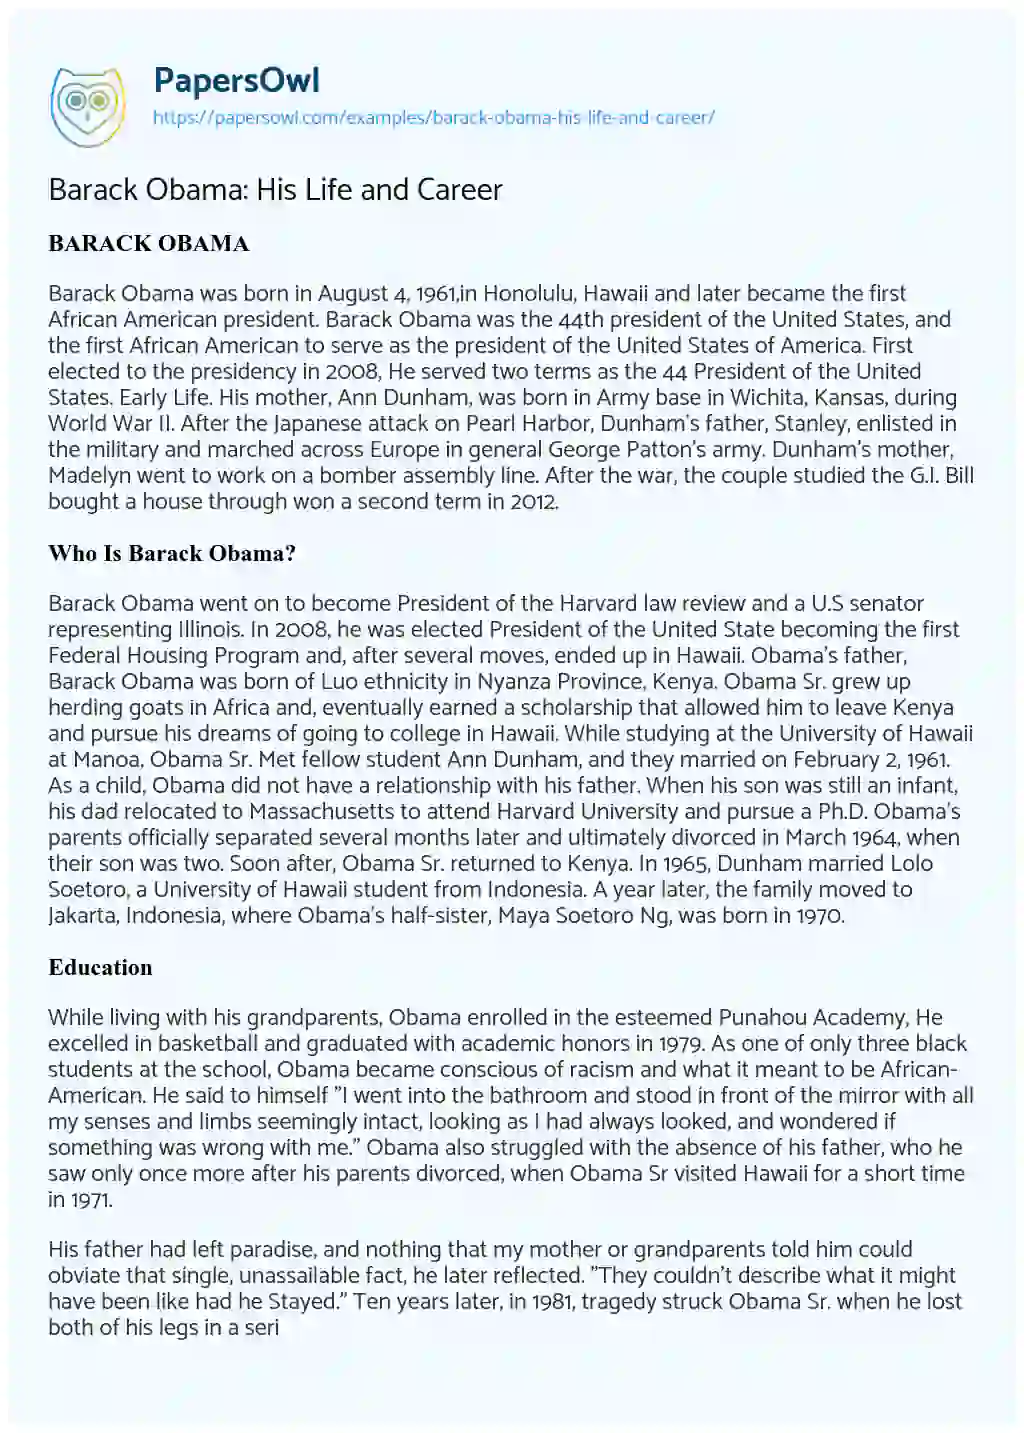 Essay on Barack Obama: his Life and Career